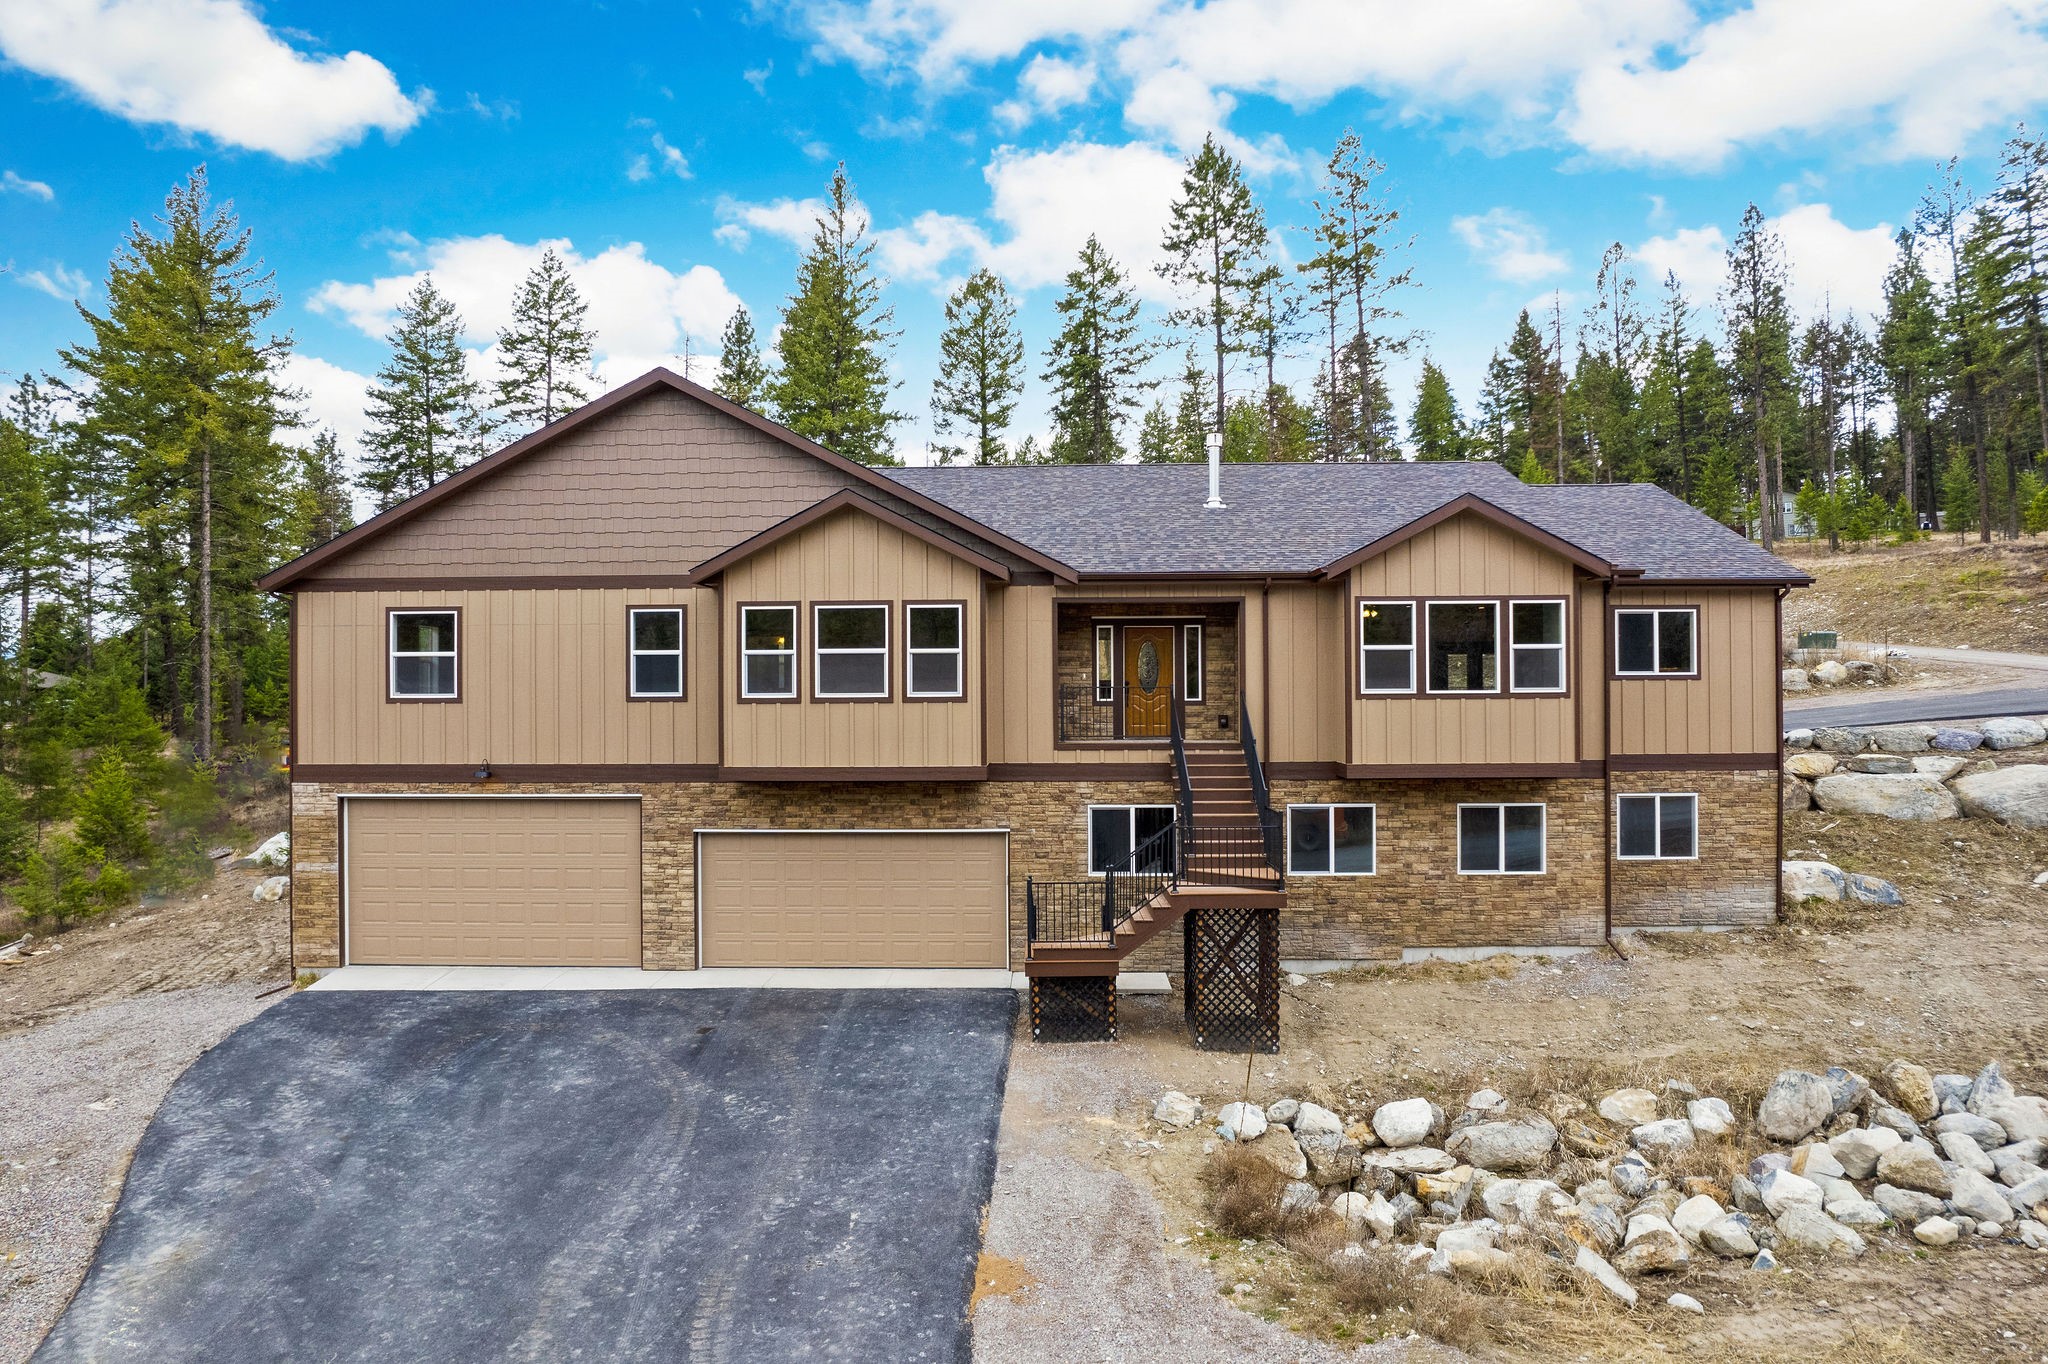 Beautiful 6BD/5BA 5,224 SF custom home under construction on 0.46 acres, minutes from Flathead Lake & Blacktail Ski Resort! The lower level features a huge 43'x46' garage, a great room w/ a wood stove, 3 bedrooms, a full bathroom, laundry room, & storage room which totals 1,535 SF of livable space. The 3,690 SF upper level features 3 bedroom suites, one w/ a propane fireplace; a kitchen w/ a 9 ft granite breakfast bar & Monogram appliances, a great room w/ a propane fireplace, an office, laundry room, powder room, a covered deck, & more! Central heat/air, two 50-gallon hot water heaters, & 1000-gallon propane tank included. Buyer has the opportunity to pick certain finishes & colors. Scheduled construction completion is Sept 2023. See Feature Sheet in docs for planned finishes & construction details. Interior photos available. Swan & Echo Lake, Glacier National Park, Whitefish Resort, Jewel Basin Hiking area nearby. Call Jennifer Shelley 406.249.8929 or your real estate professional.